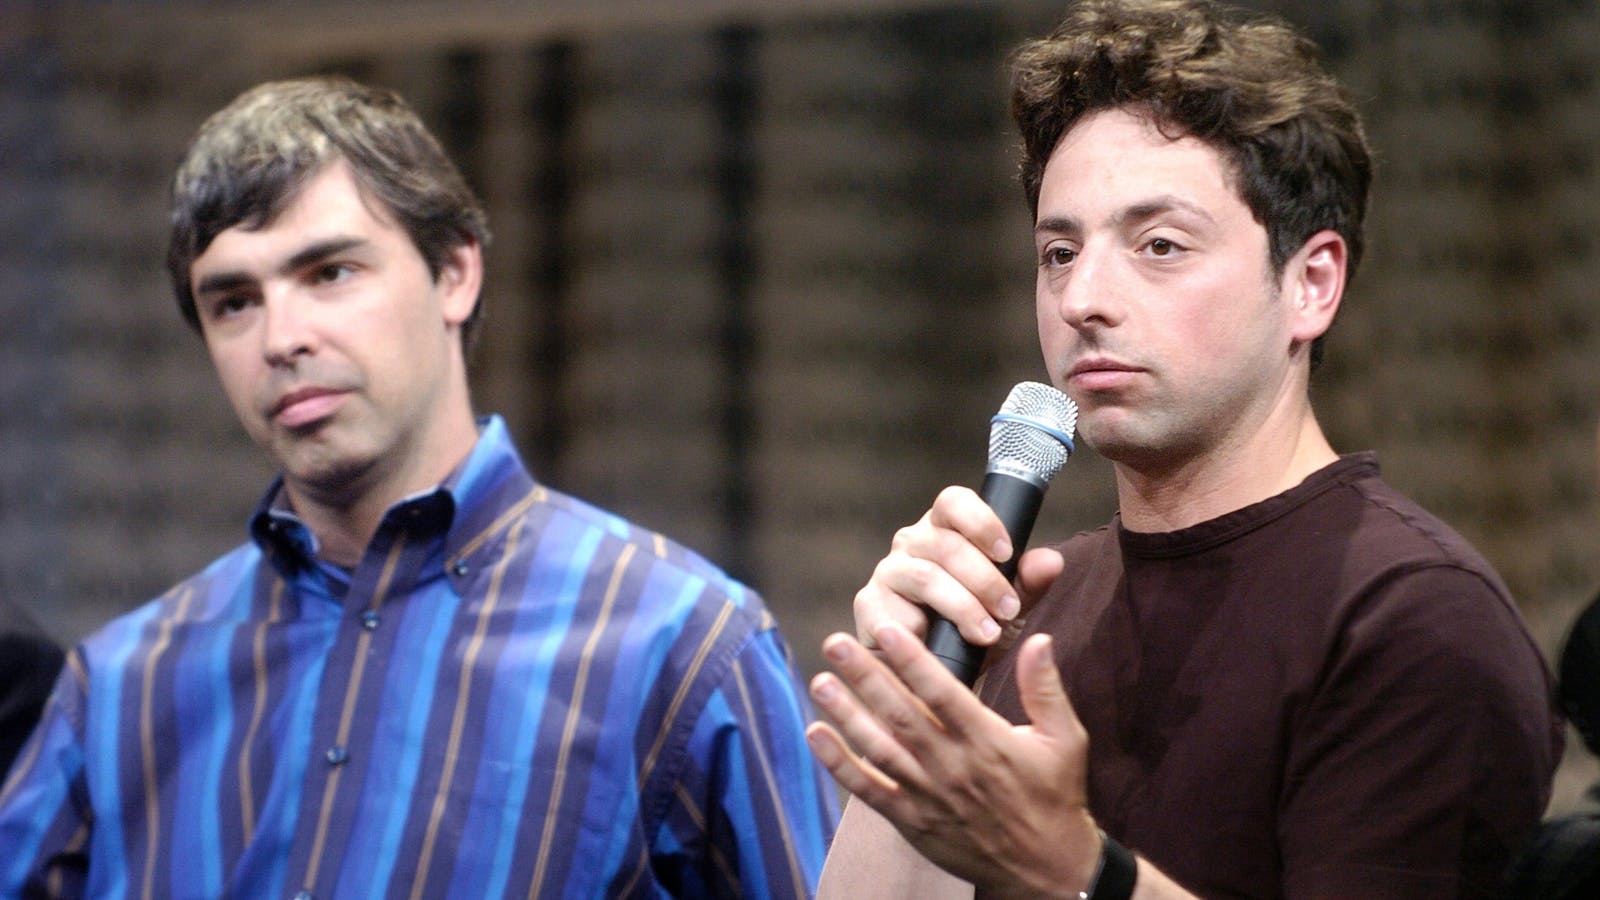 Google co-founders Larry Page and Sergey Brin. Photo by AP.